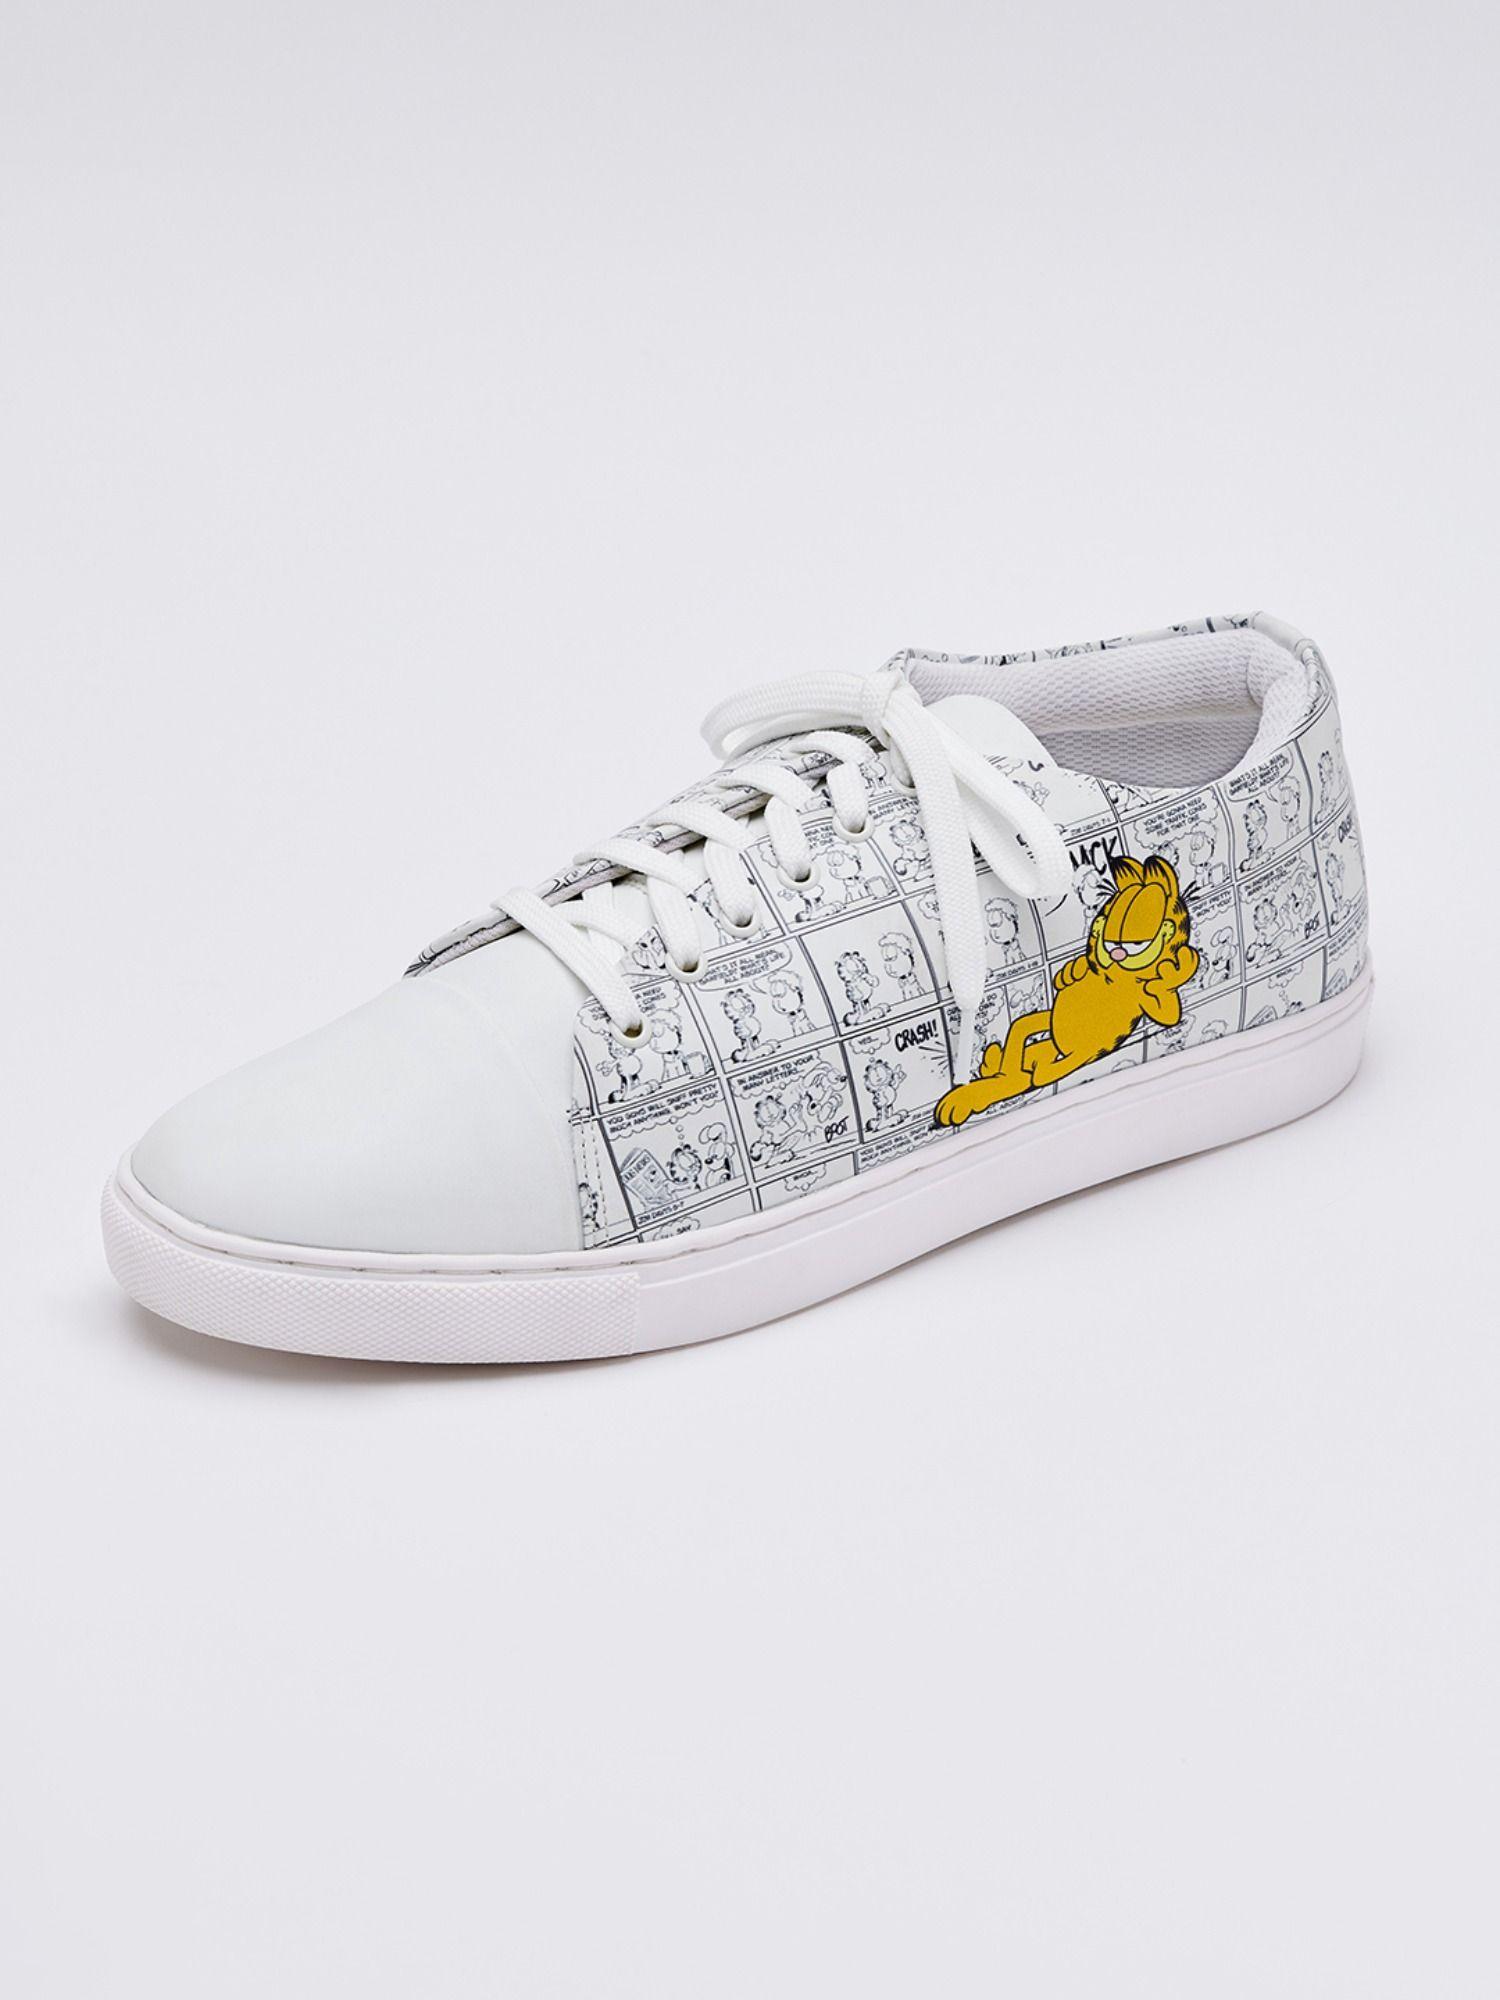 garfield: just chilling men lace up shoes white aop character print